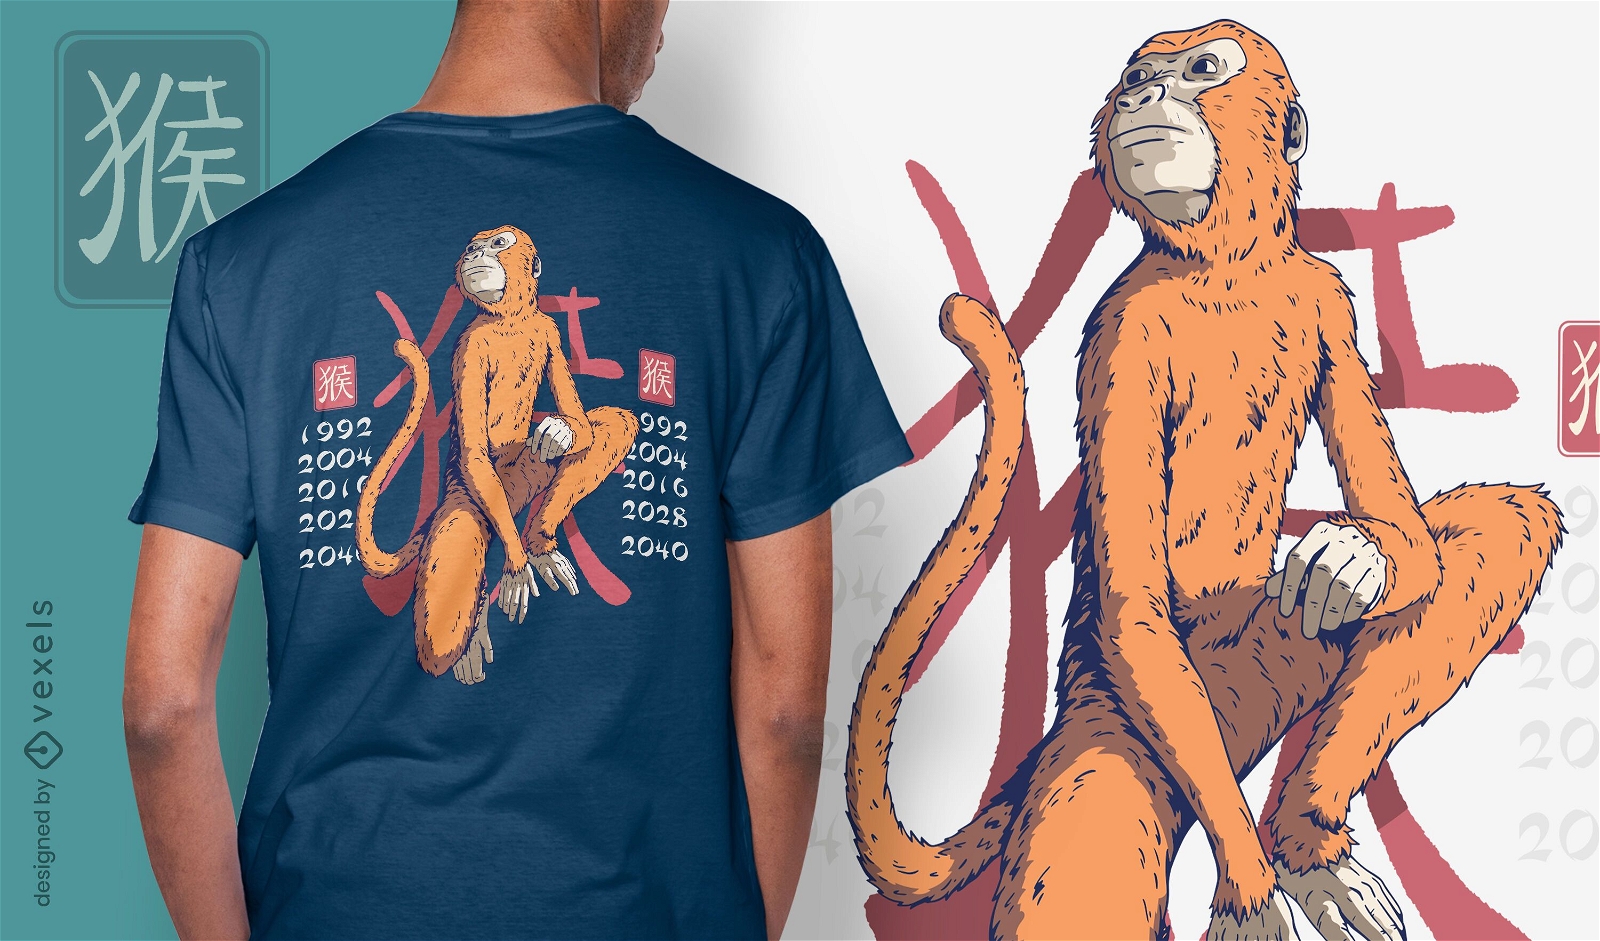 Year of the monkey t-shirt design